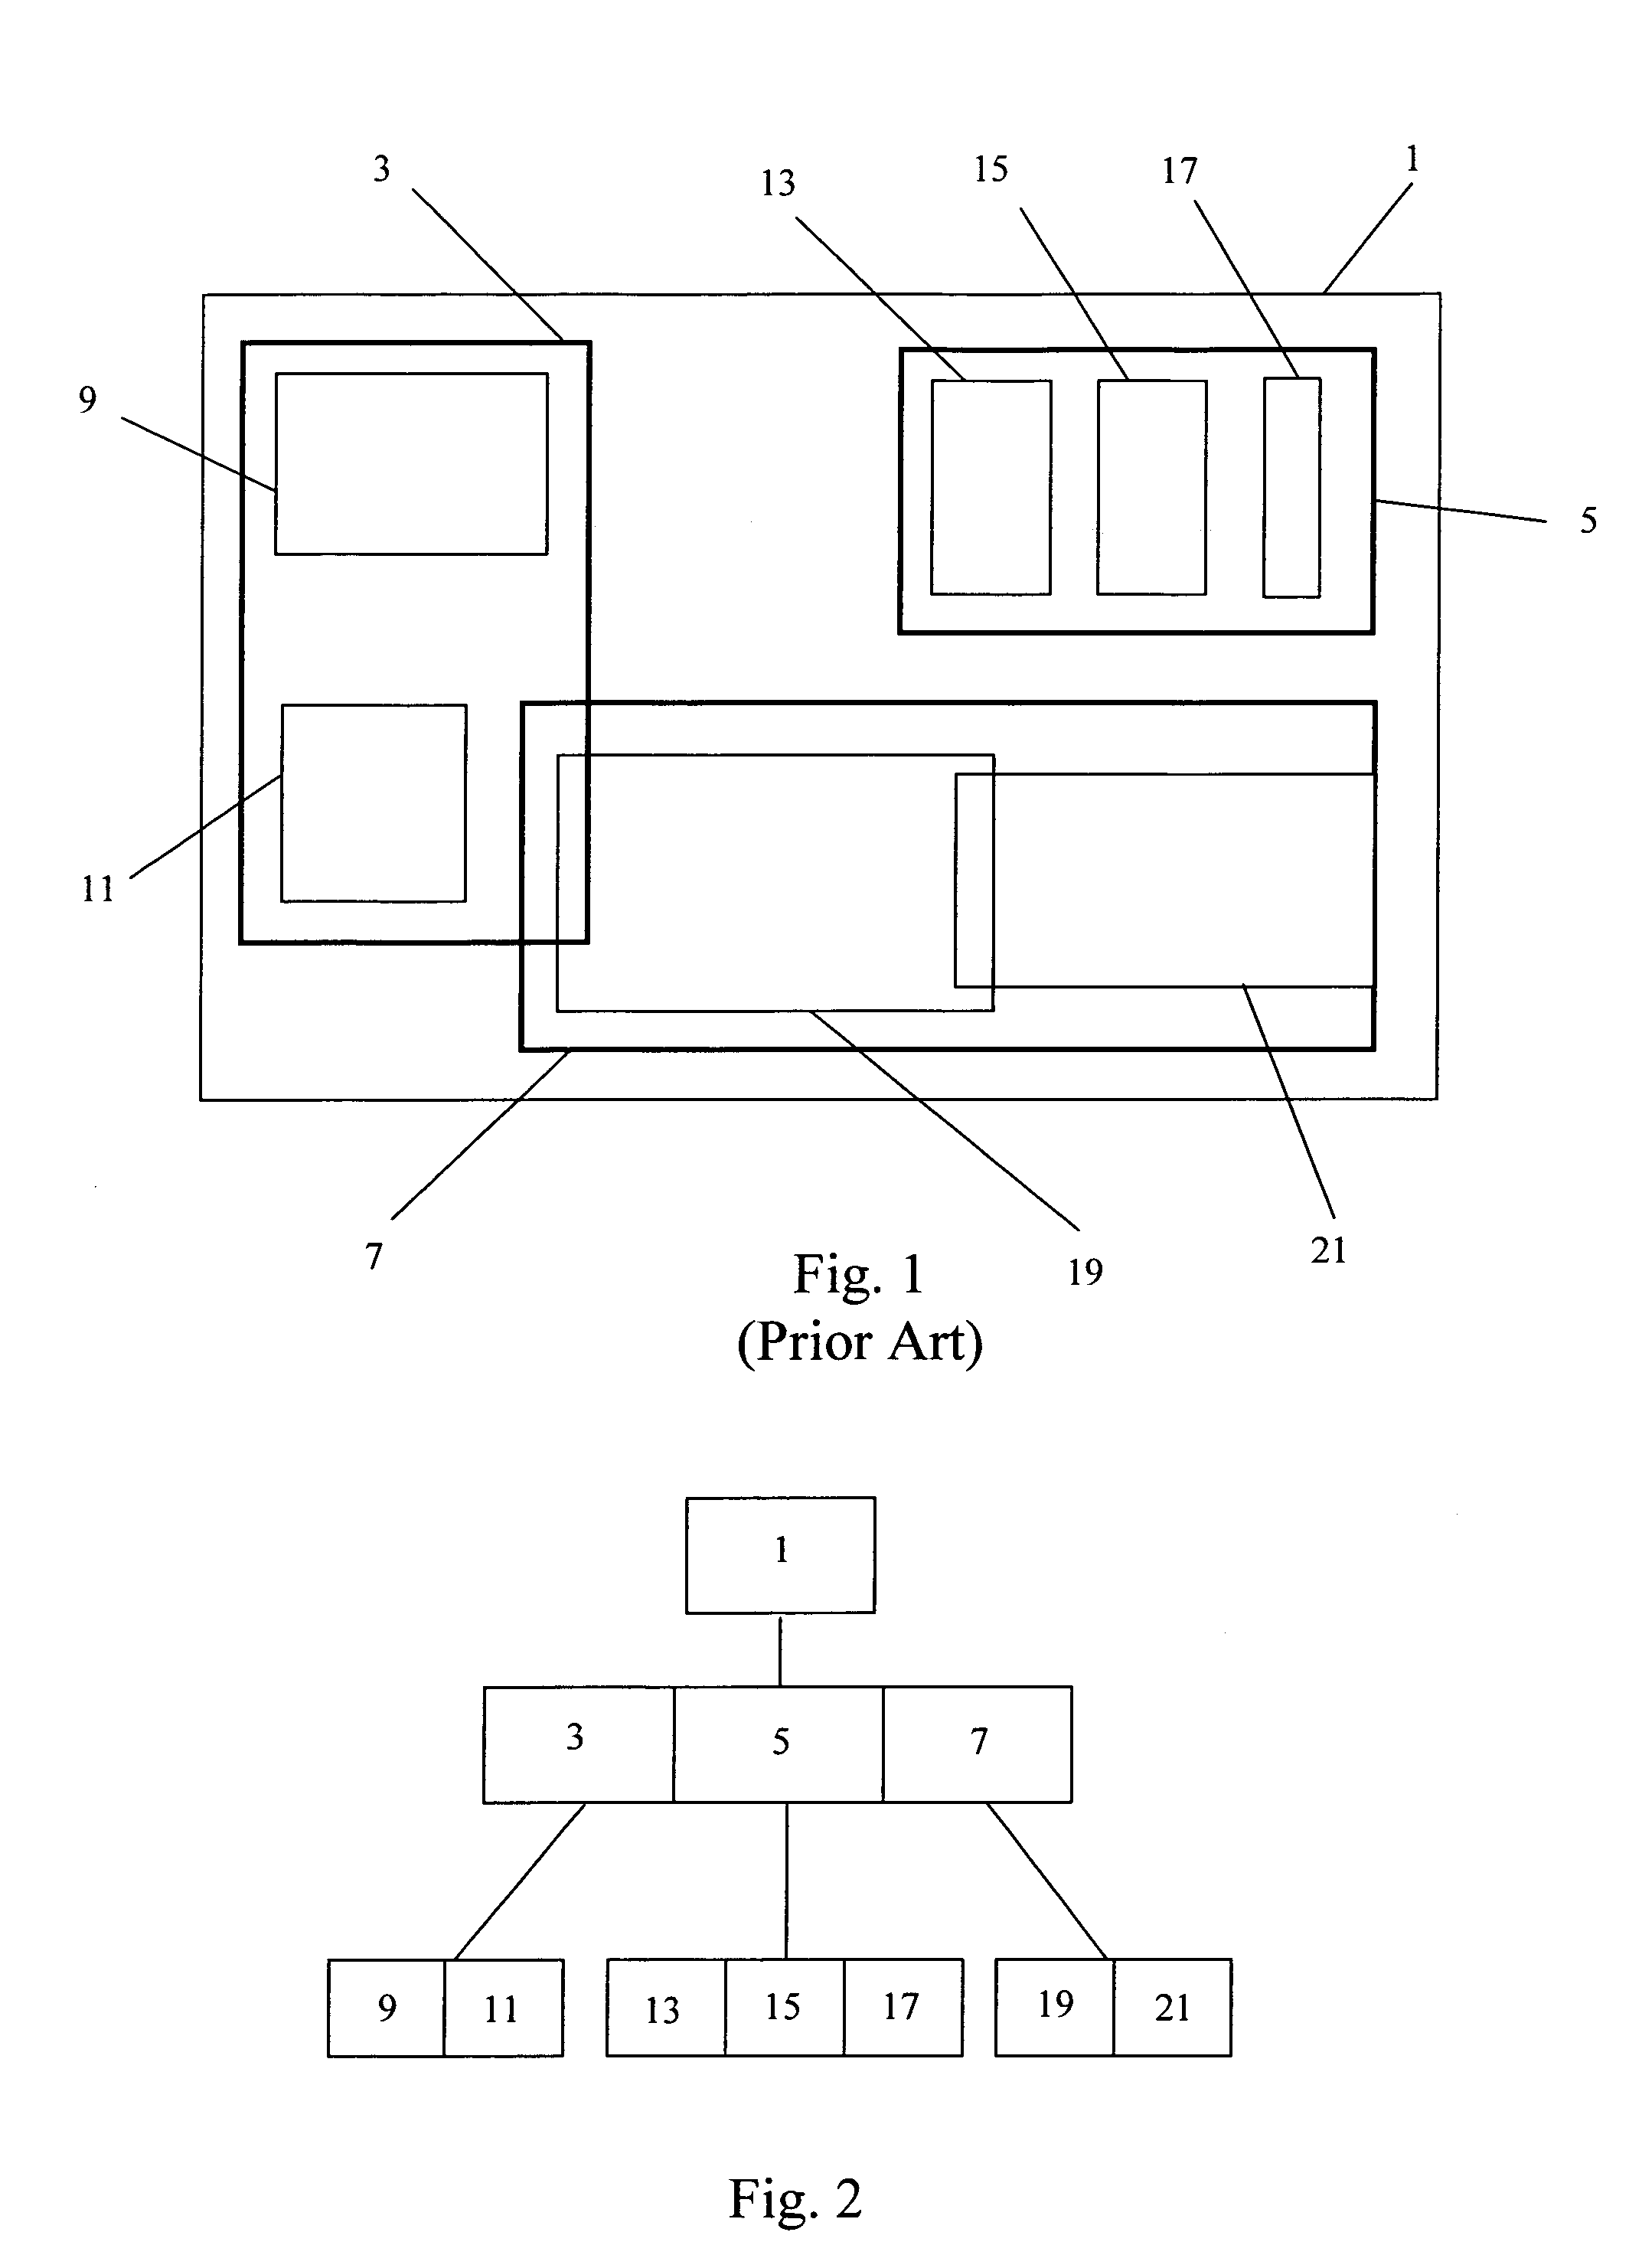 Within-distance query pruning in an R-tree index